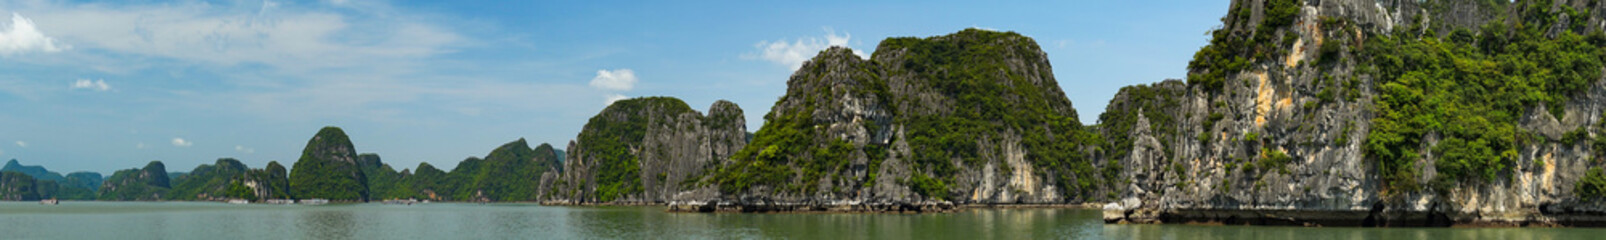 Fototapeta na wymiar Scenic view of the Halong Bay (Descending Dragon Bay) at the Gulf of Tonkin of the South China Sea, Vietnam. Landscape formed by karst towers-isles in various sizes and shapes. Blue sky in background